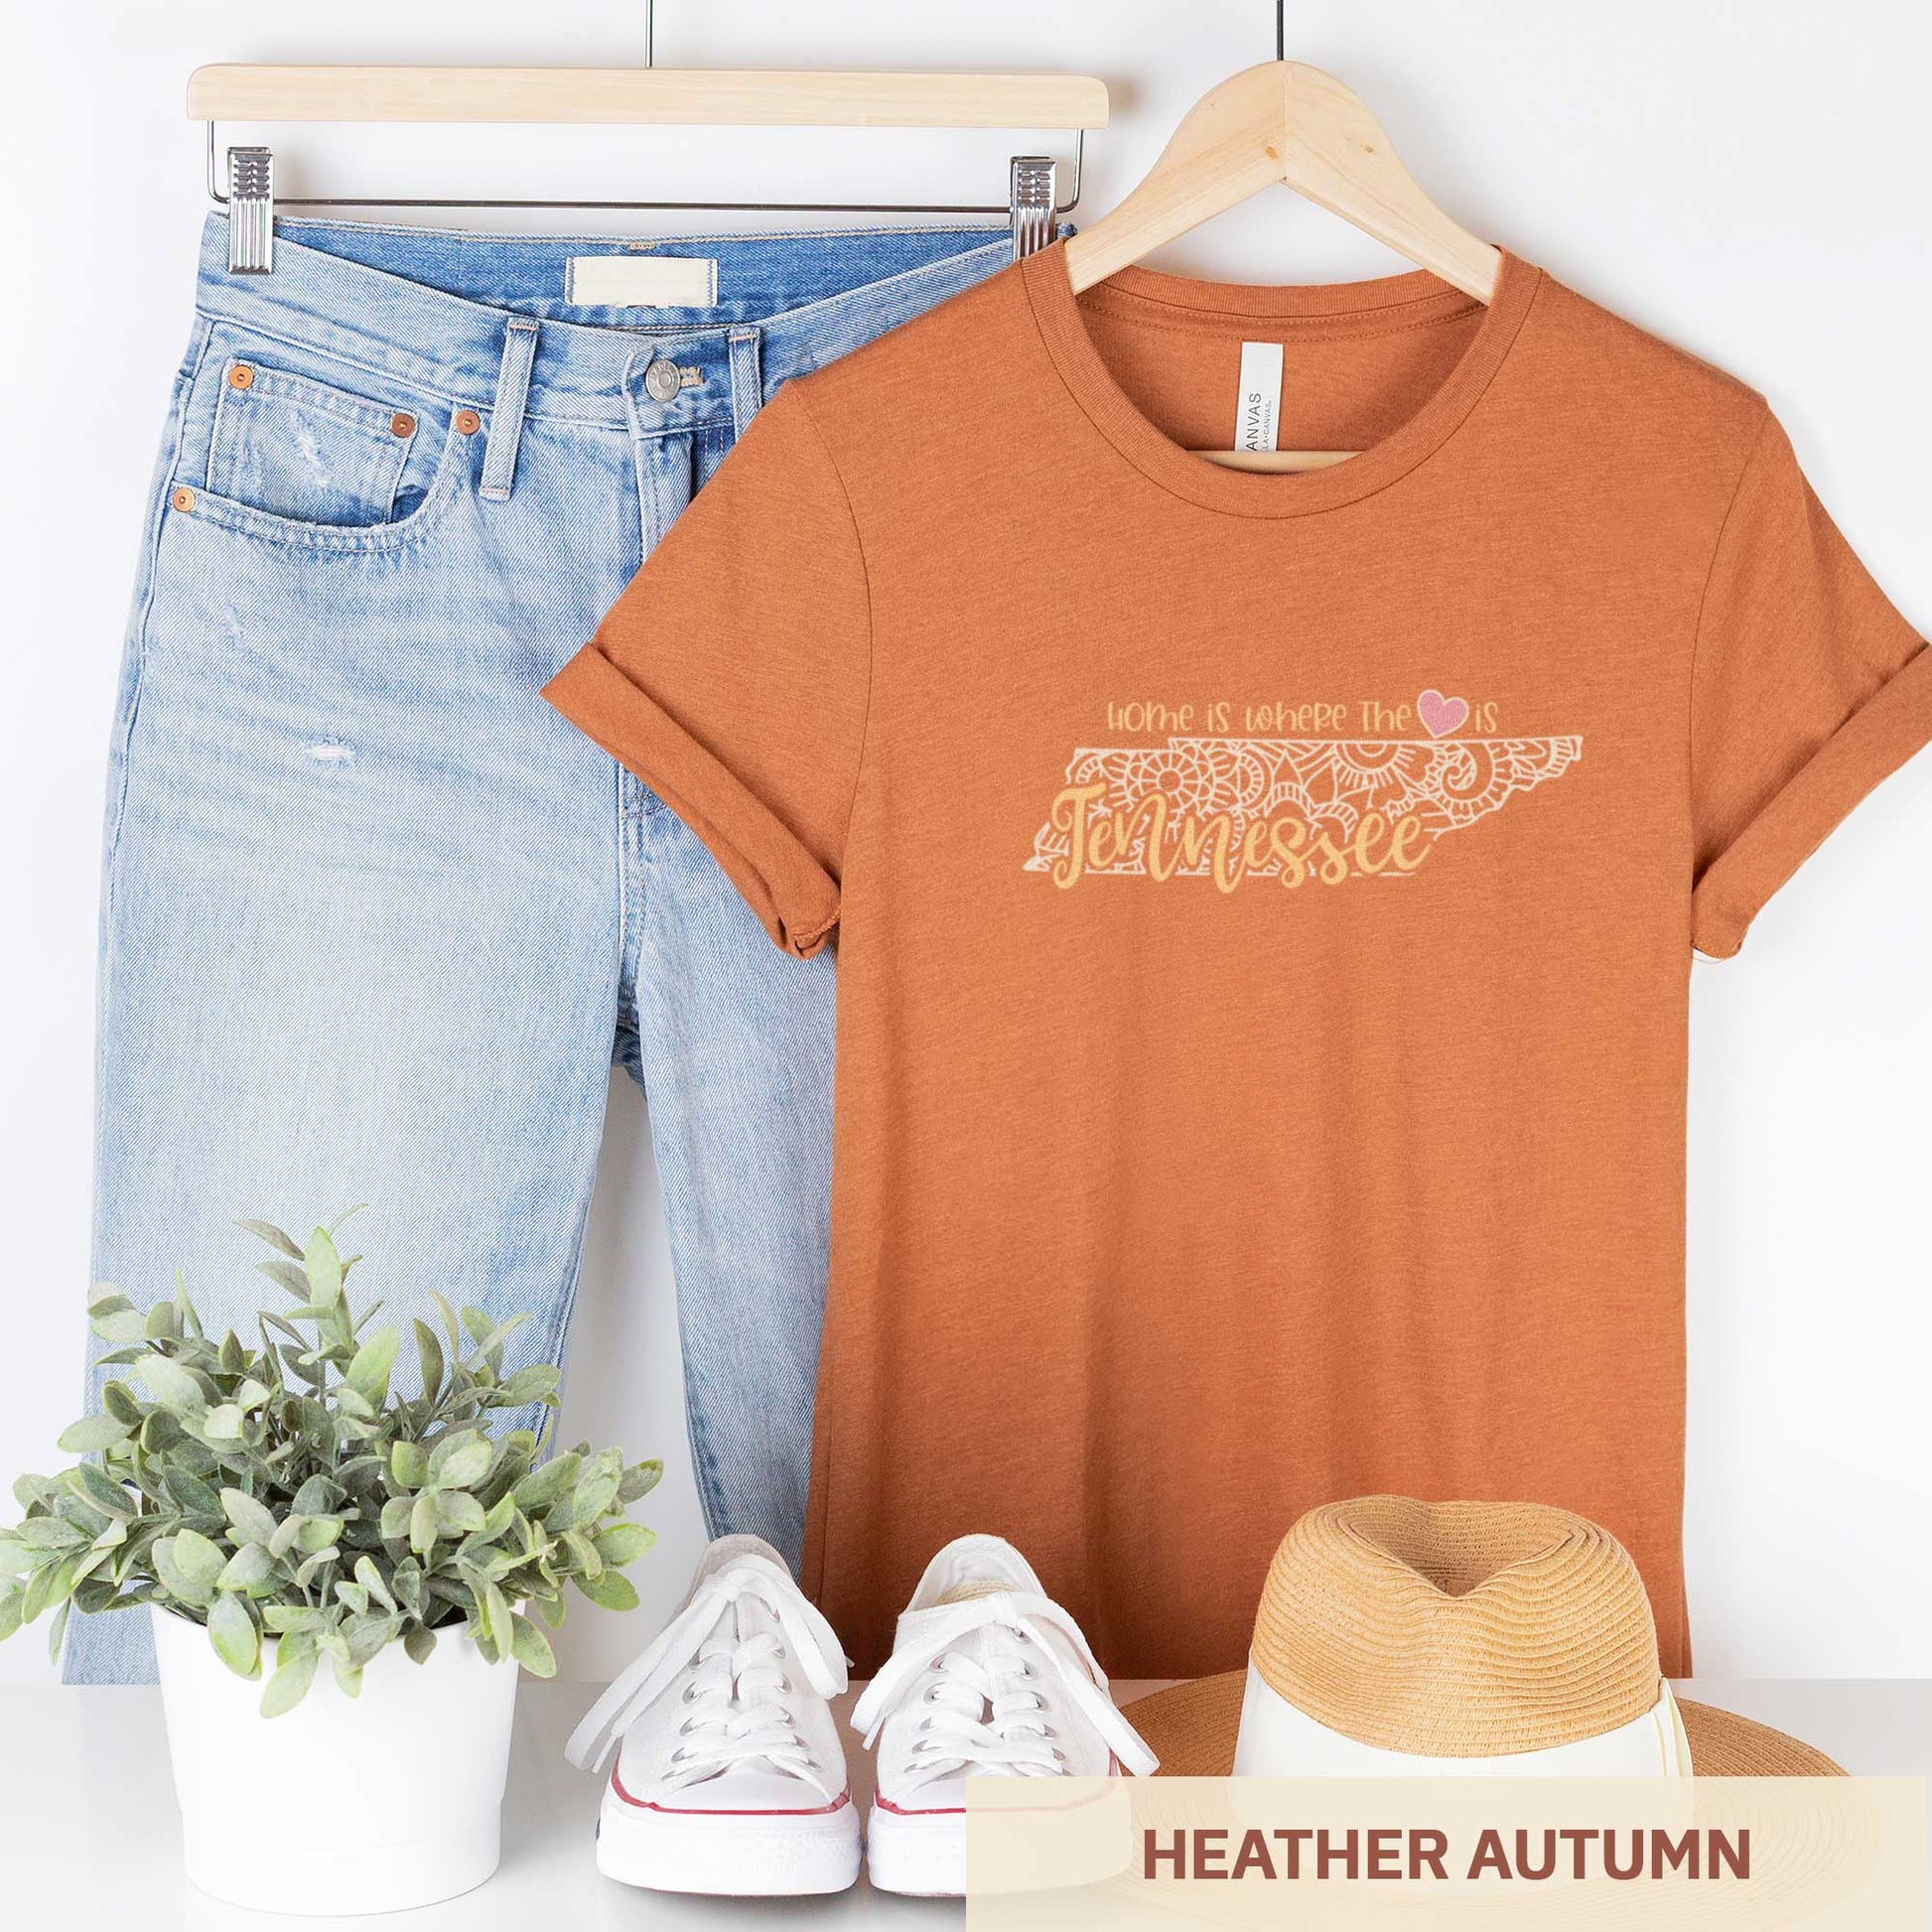 A hanging heather autumn Bella Canvas t-shirt featuring a mandala in the shape of Tennessee with the words home is where the heart is.